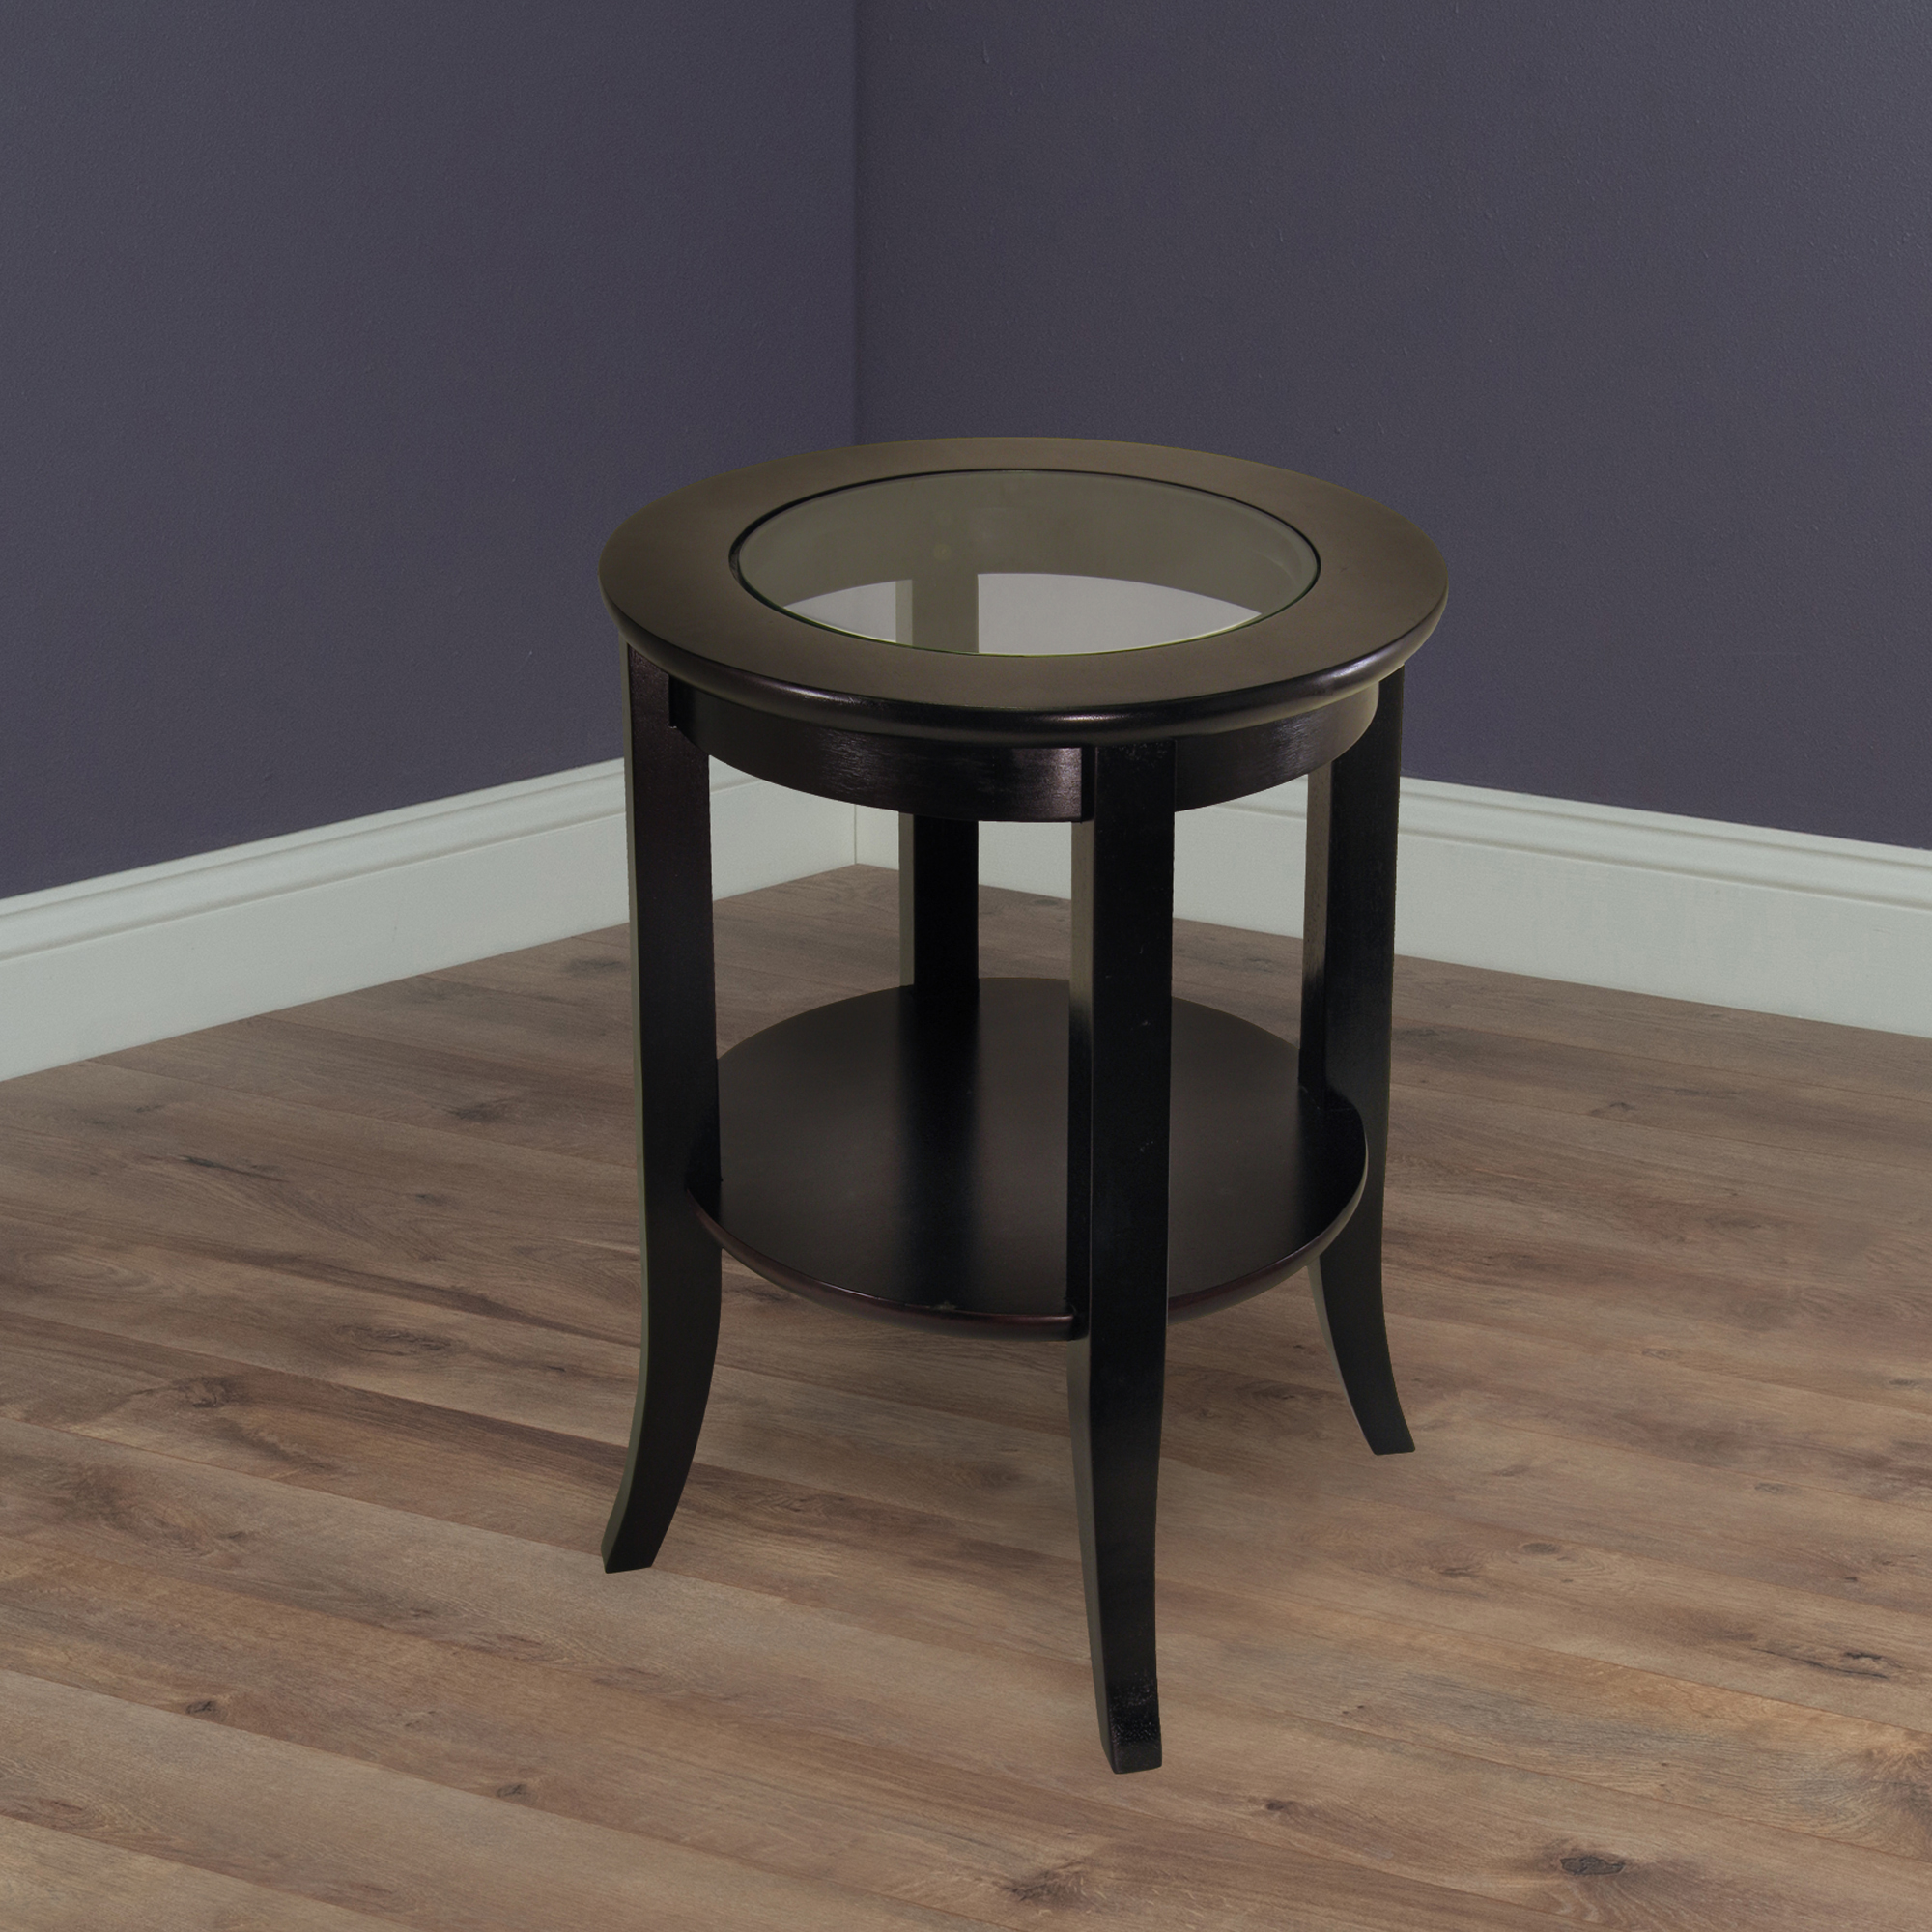 Winsome Wood Genoa Round End Table with Glass Top, Espresso Finish - image 4 of 4